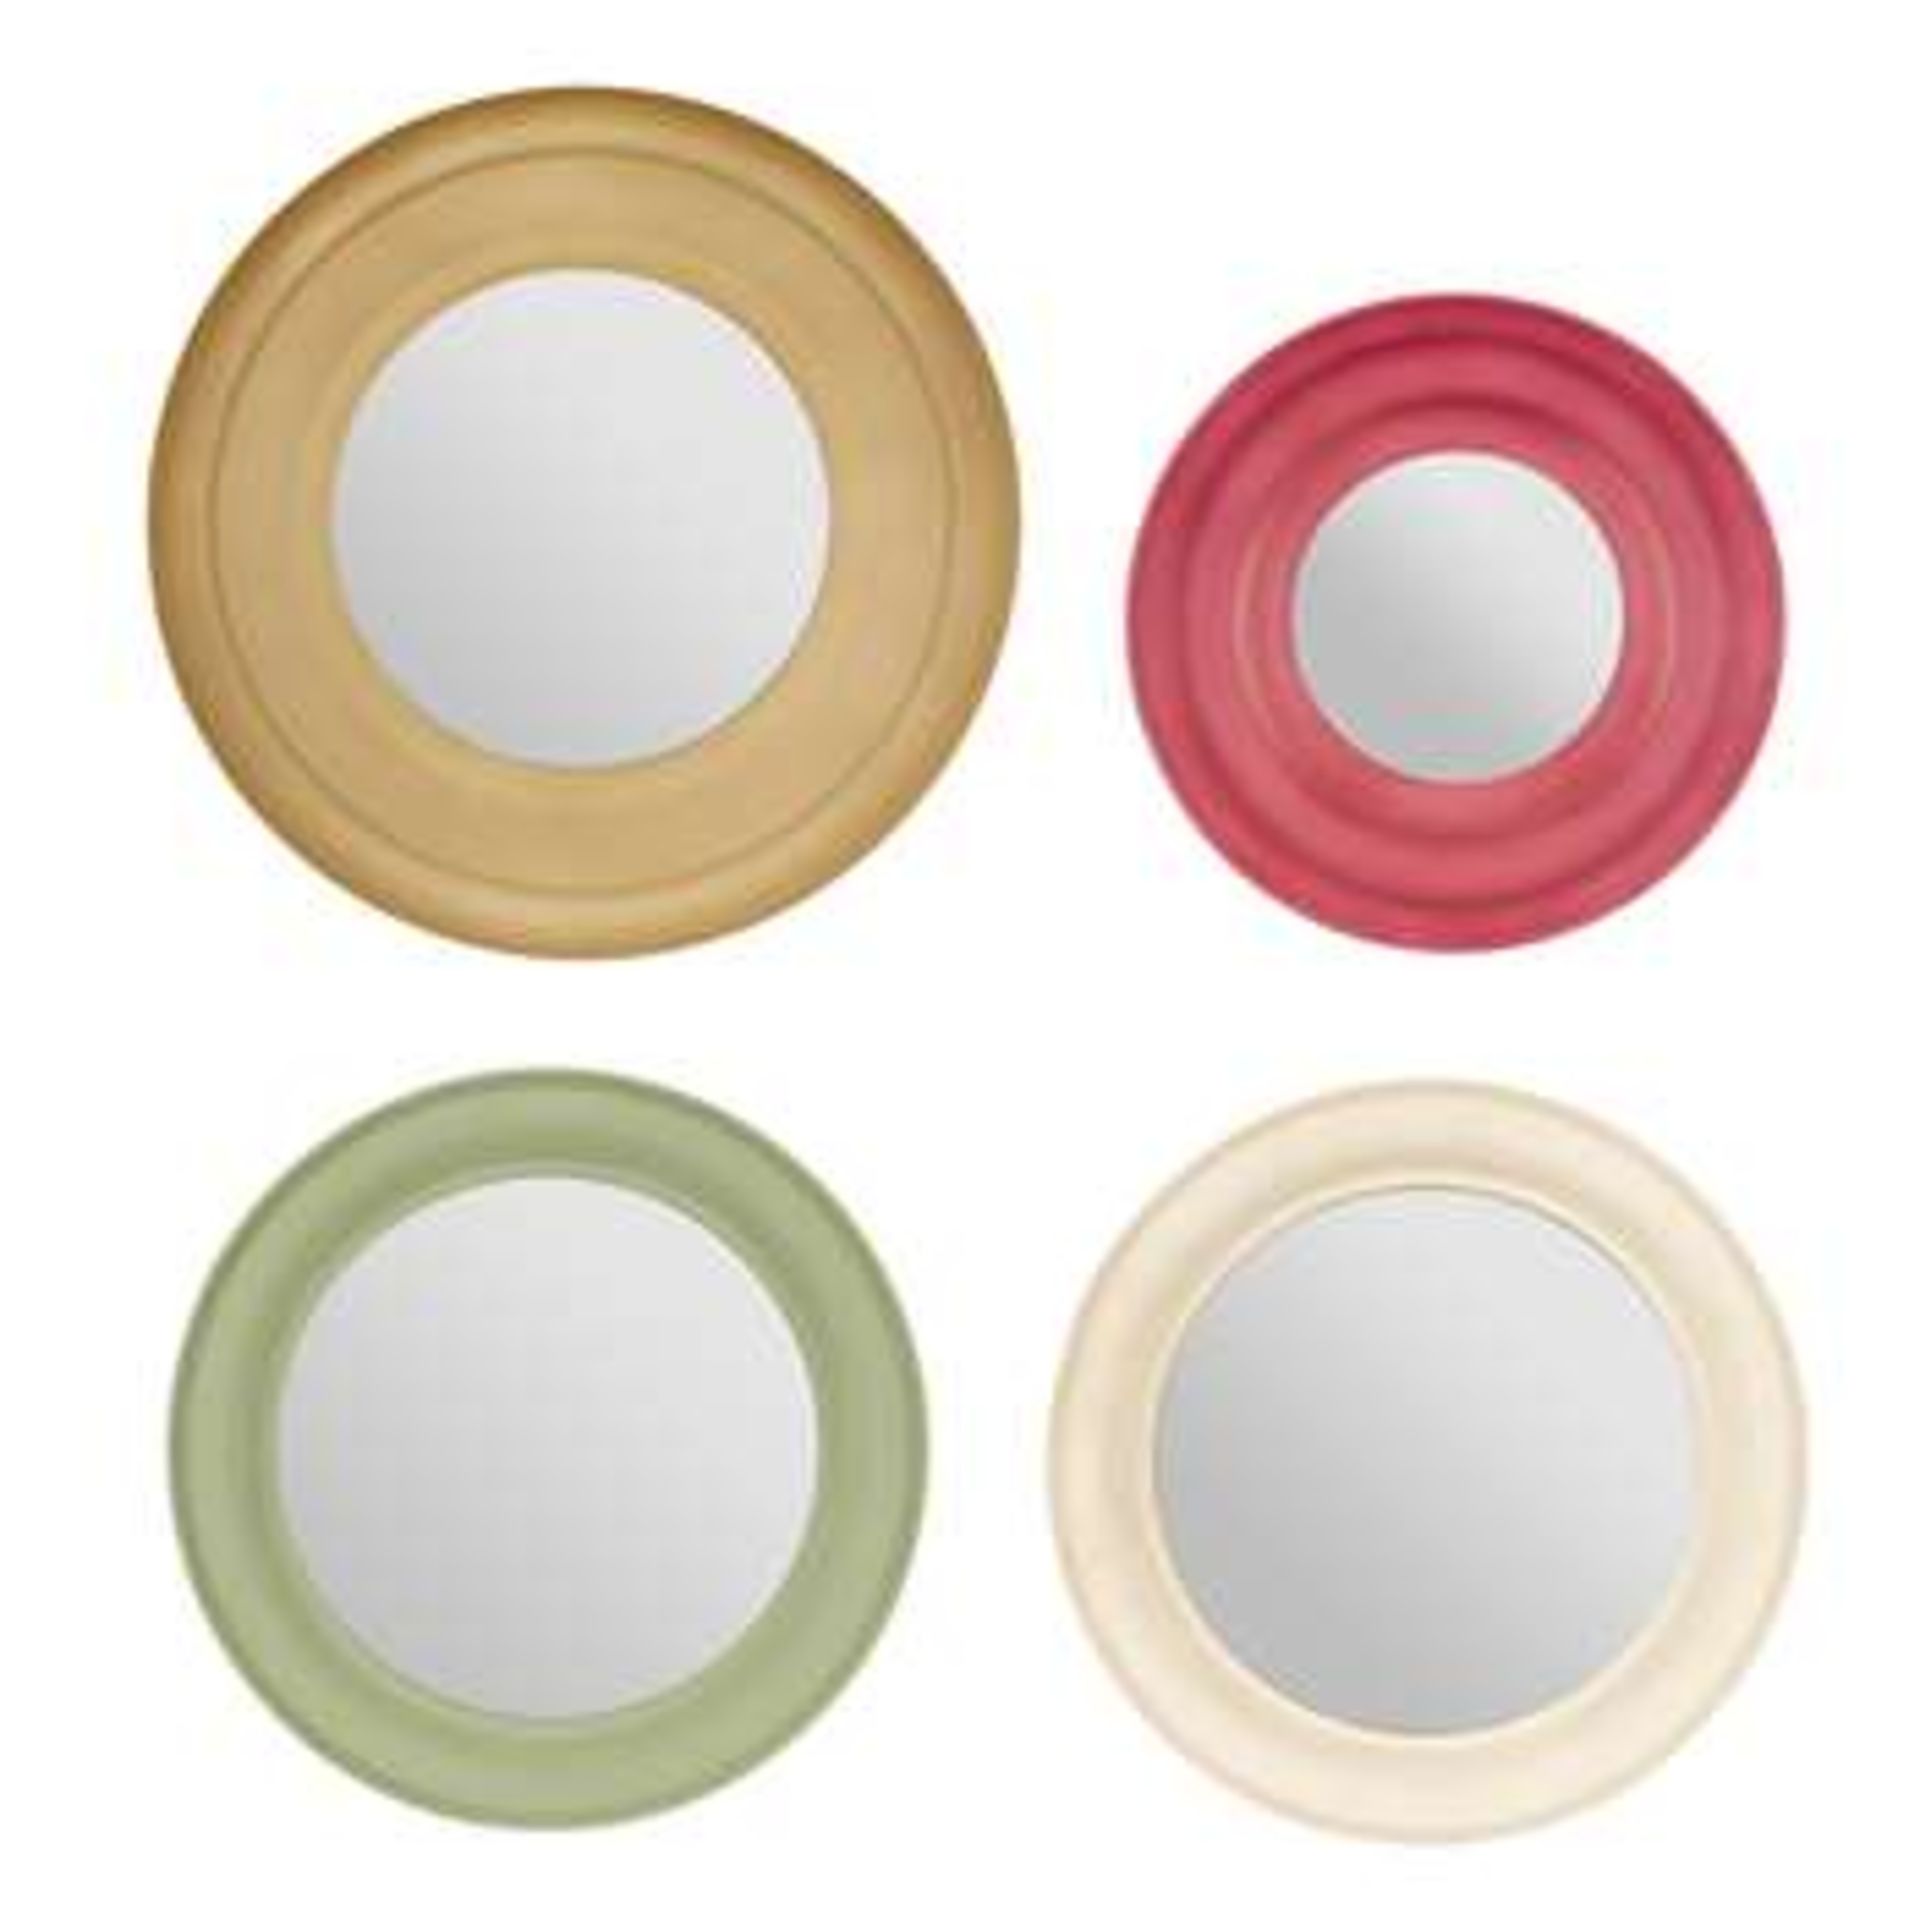 Laura Ashley Haddon Mirrors a set of 4 x vibrant mirrors simply stunning when added as an accent